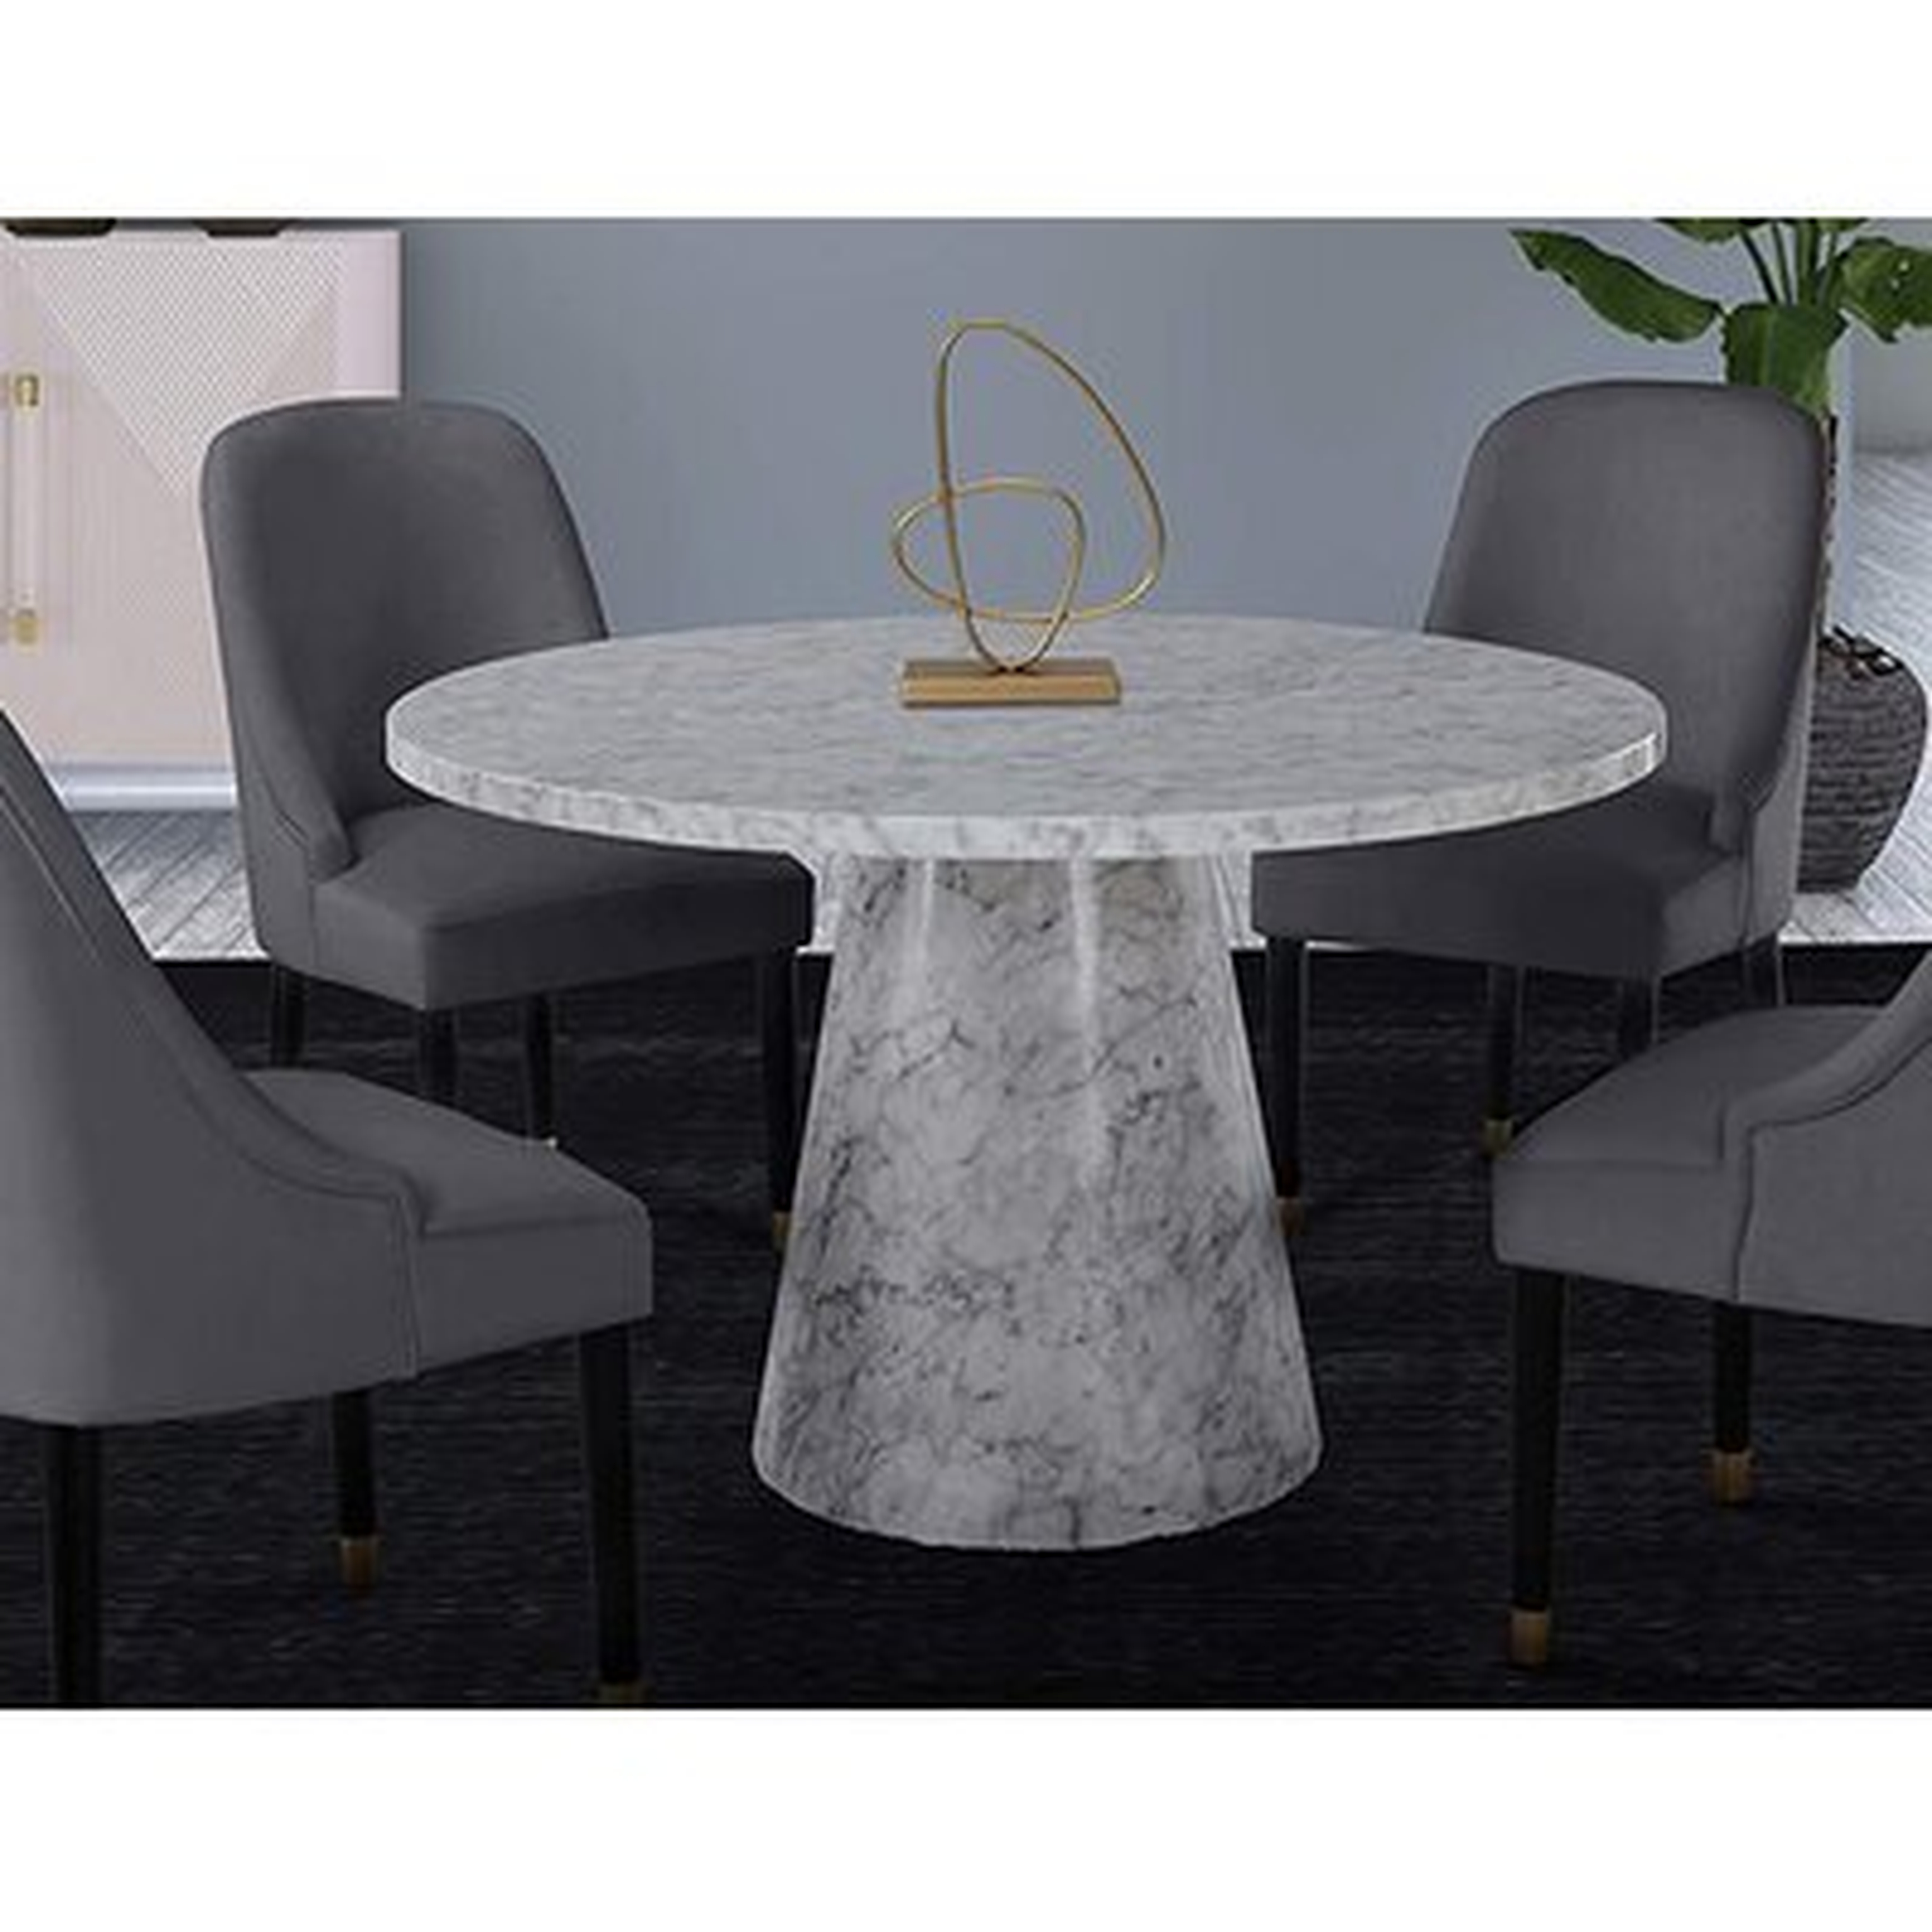 48 Inch Round Marble Dining Table - Wayfair